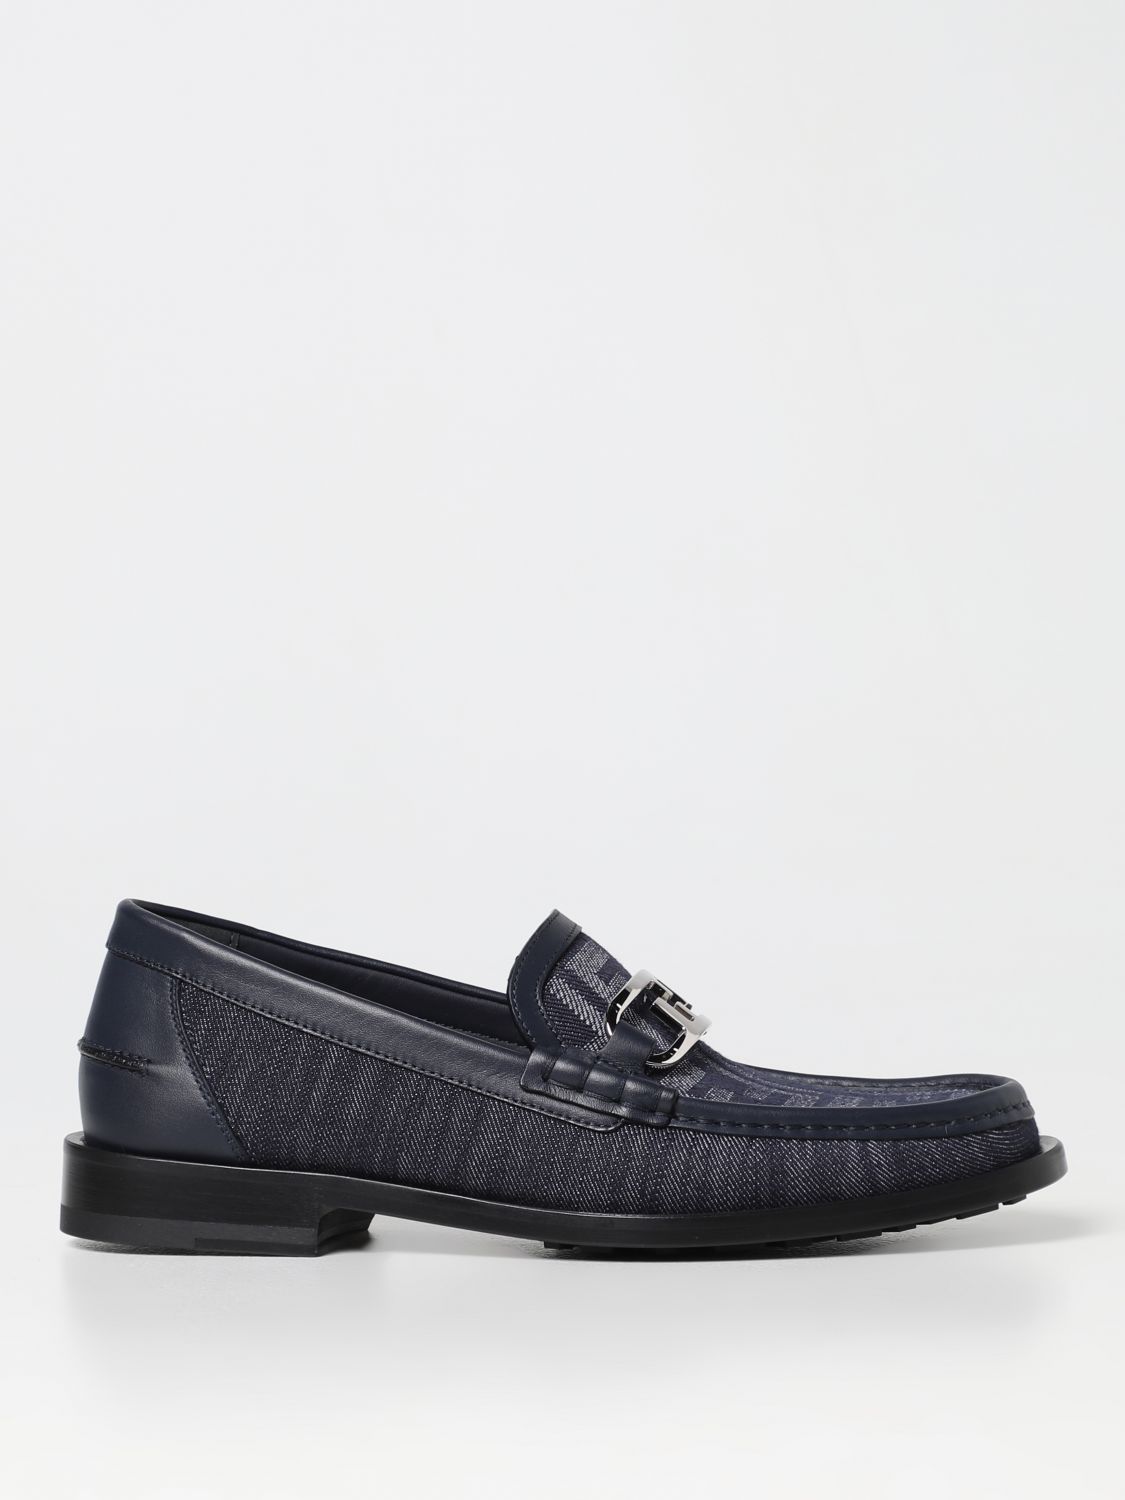 FENDI: O'Lock loafers in denim and leather - Black | Fendi loafers ...